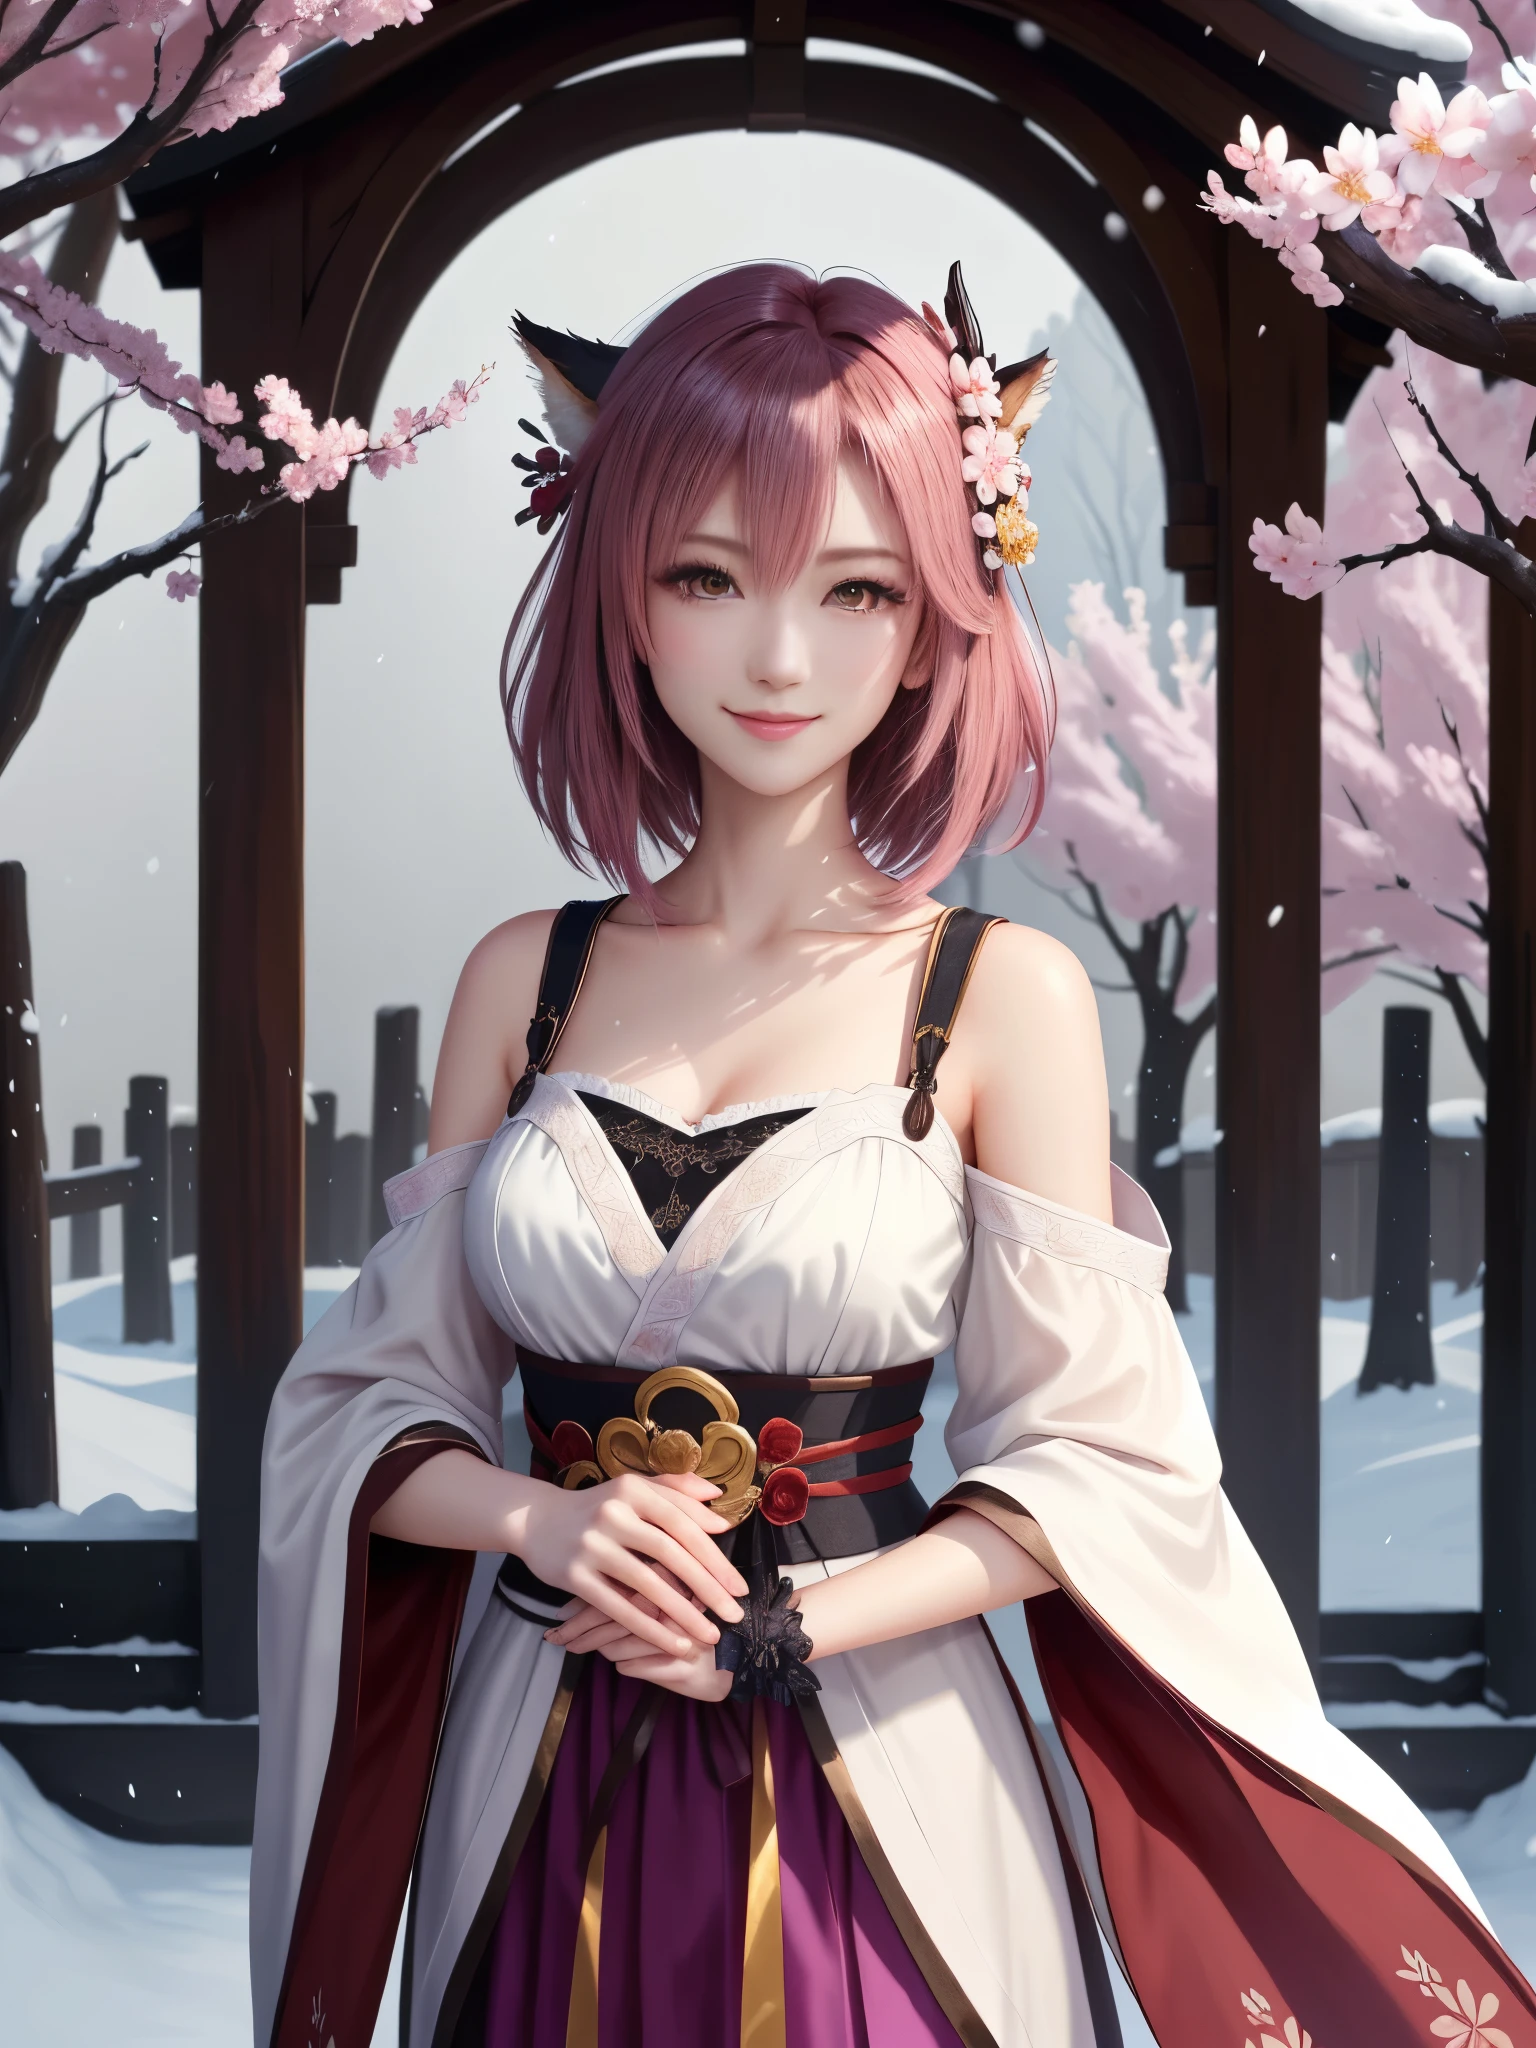 masterpiece , best quality,smile,smile,small face,shoulder exposure,less cleavage exposure,light pink hair,slender body shape,brown eyes,sharp contrast,short hair,Beautiful short hair,Berry Short,short cut hair,just one person,precision quality,Faithfully reproduced eyes, Cherry blossom background,snow scene,masterpiece, Fantastic cherry blossom background,night,Night background,cherry blossom background,beautiful details, colorful, delicate details, delicate lips, intricate details, genuine, ultrargenuineista, Girl with multicolored haired fox sitting on a branch:Mature, bright eyes, ,Colorful Fox, raposa de nine tails, Three tails Fox, Three tails Fox, onmyoji detail art, beautiful fine art illustration, mythical creatures, Fox, beautiful digital art,shrine maiden,hold hands,exquisite digital illustration, mizutsune, Inspired by mythical wild web creatures, pixiv in digital art, shining light, high contrast, Mysterious,